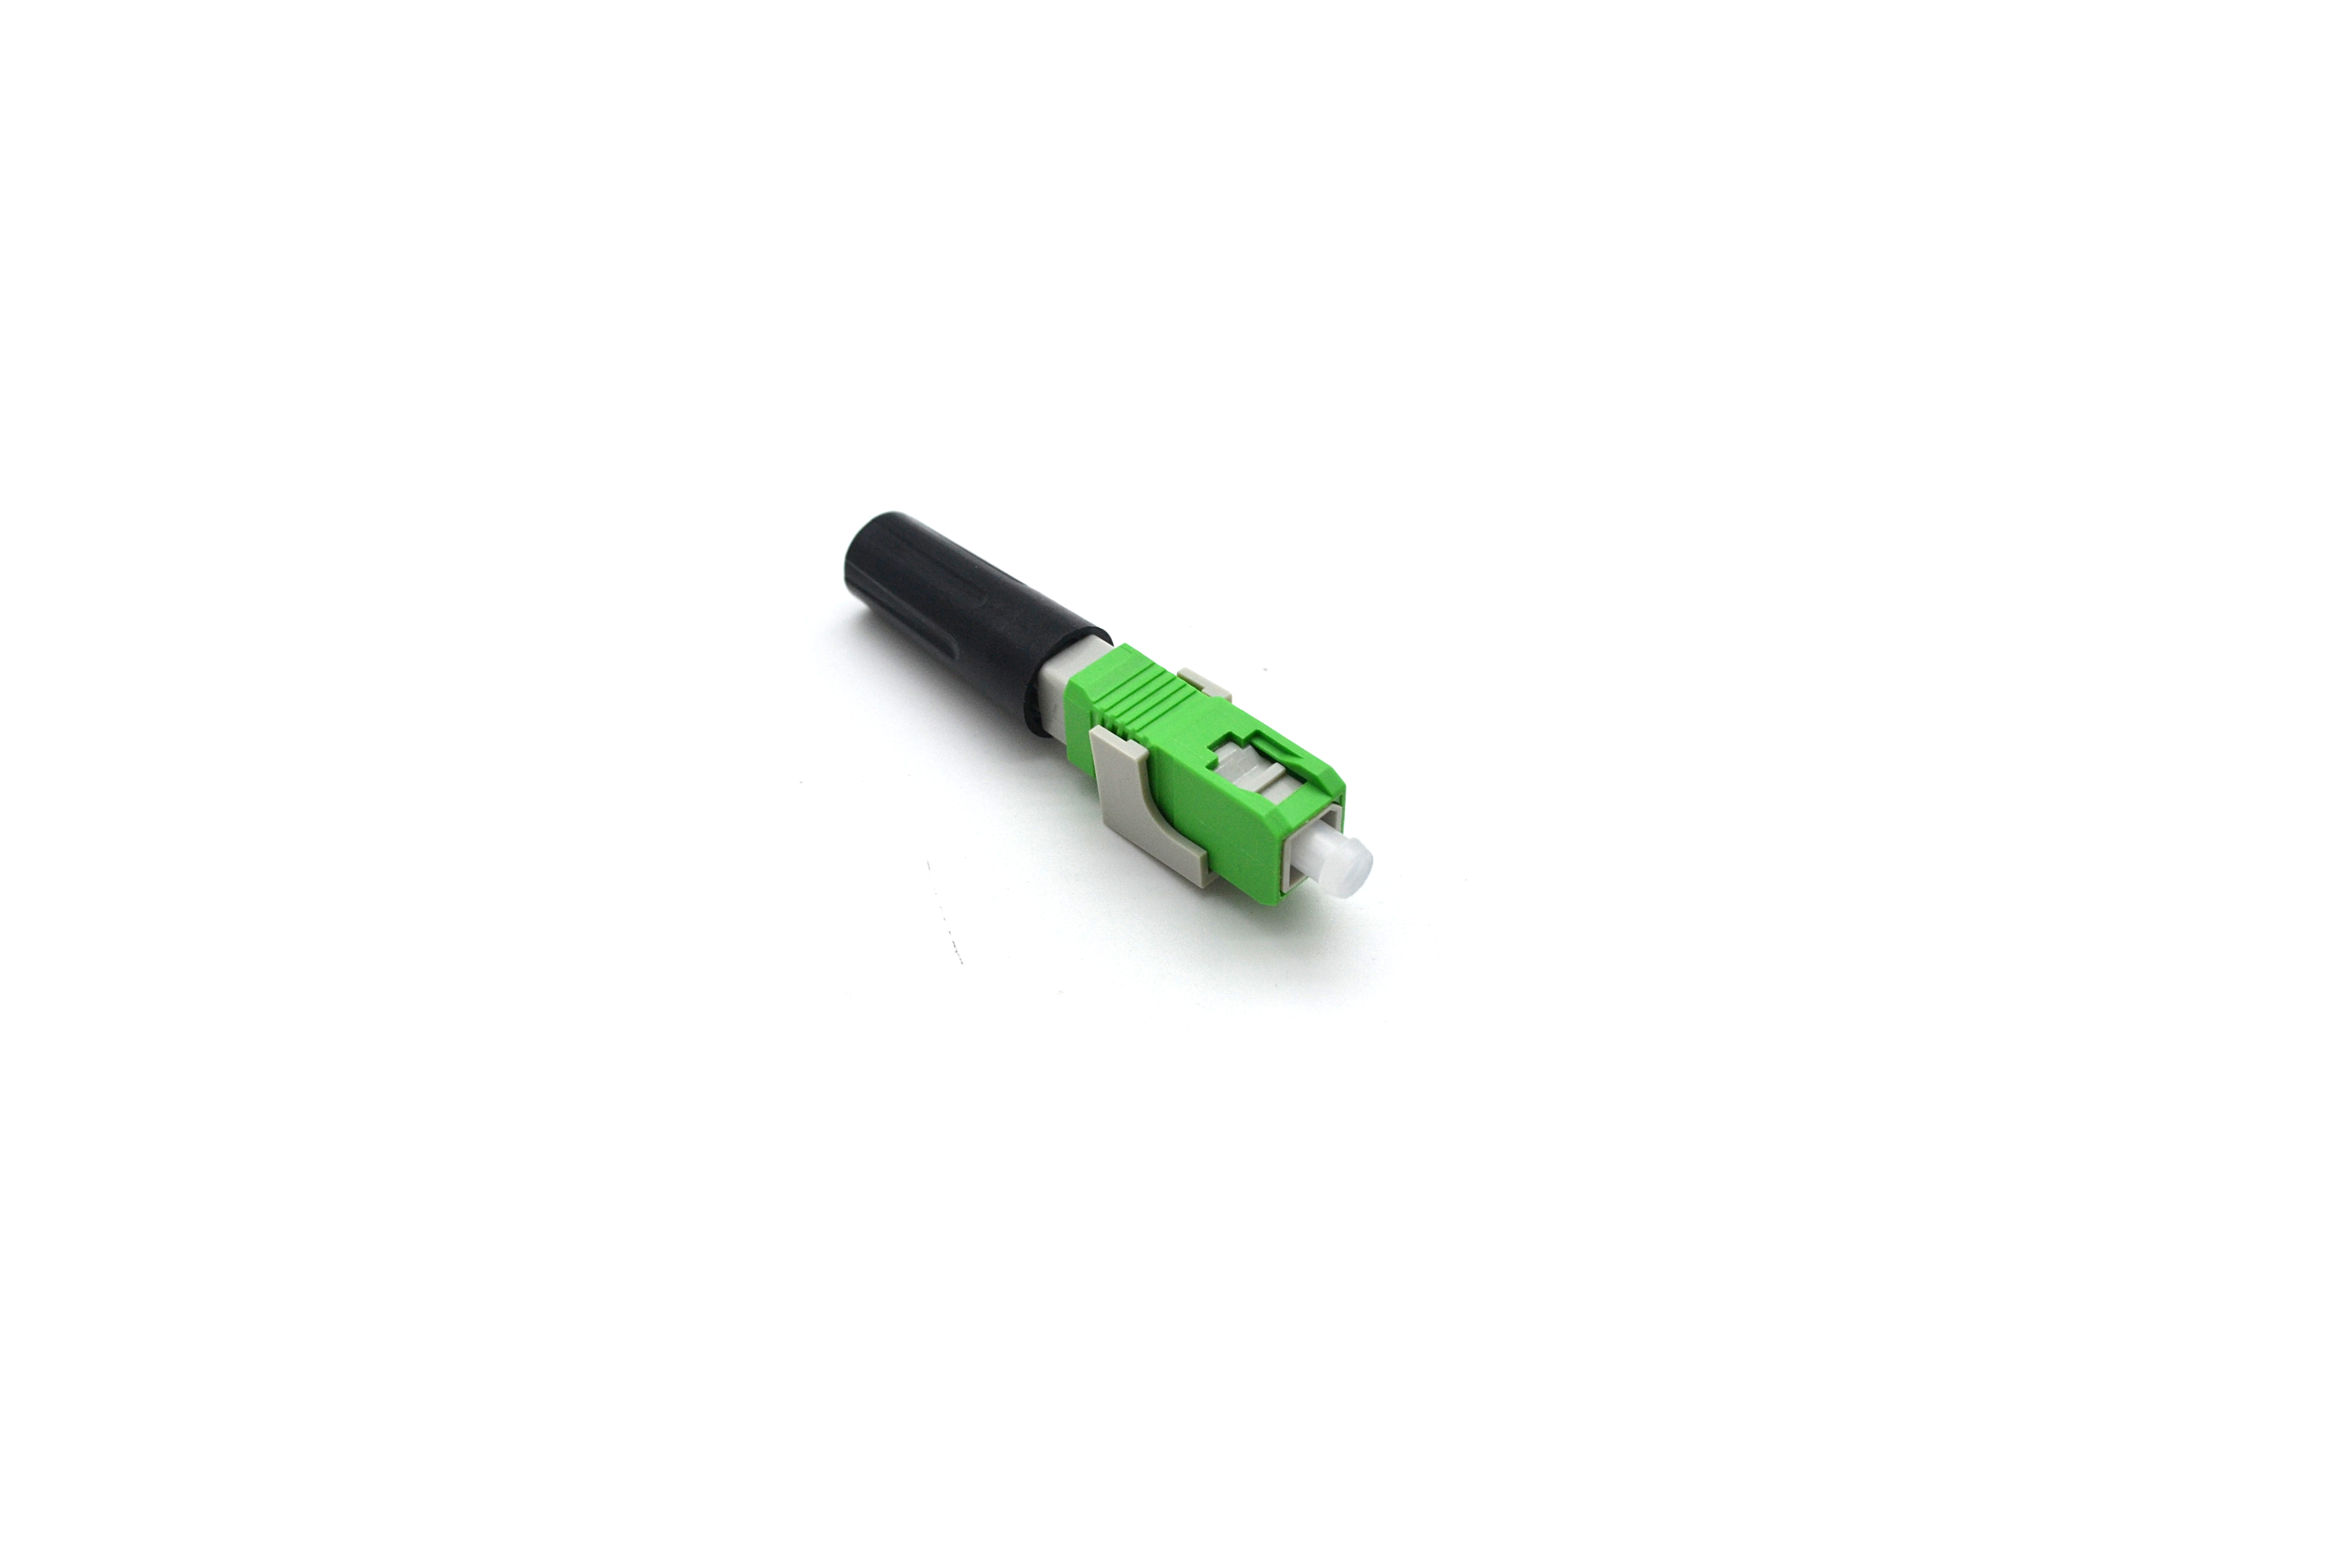 Carefiber dependable lc fast connector trader for consumer elctronics-2